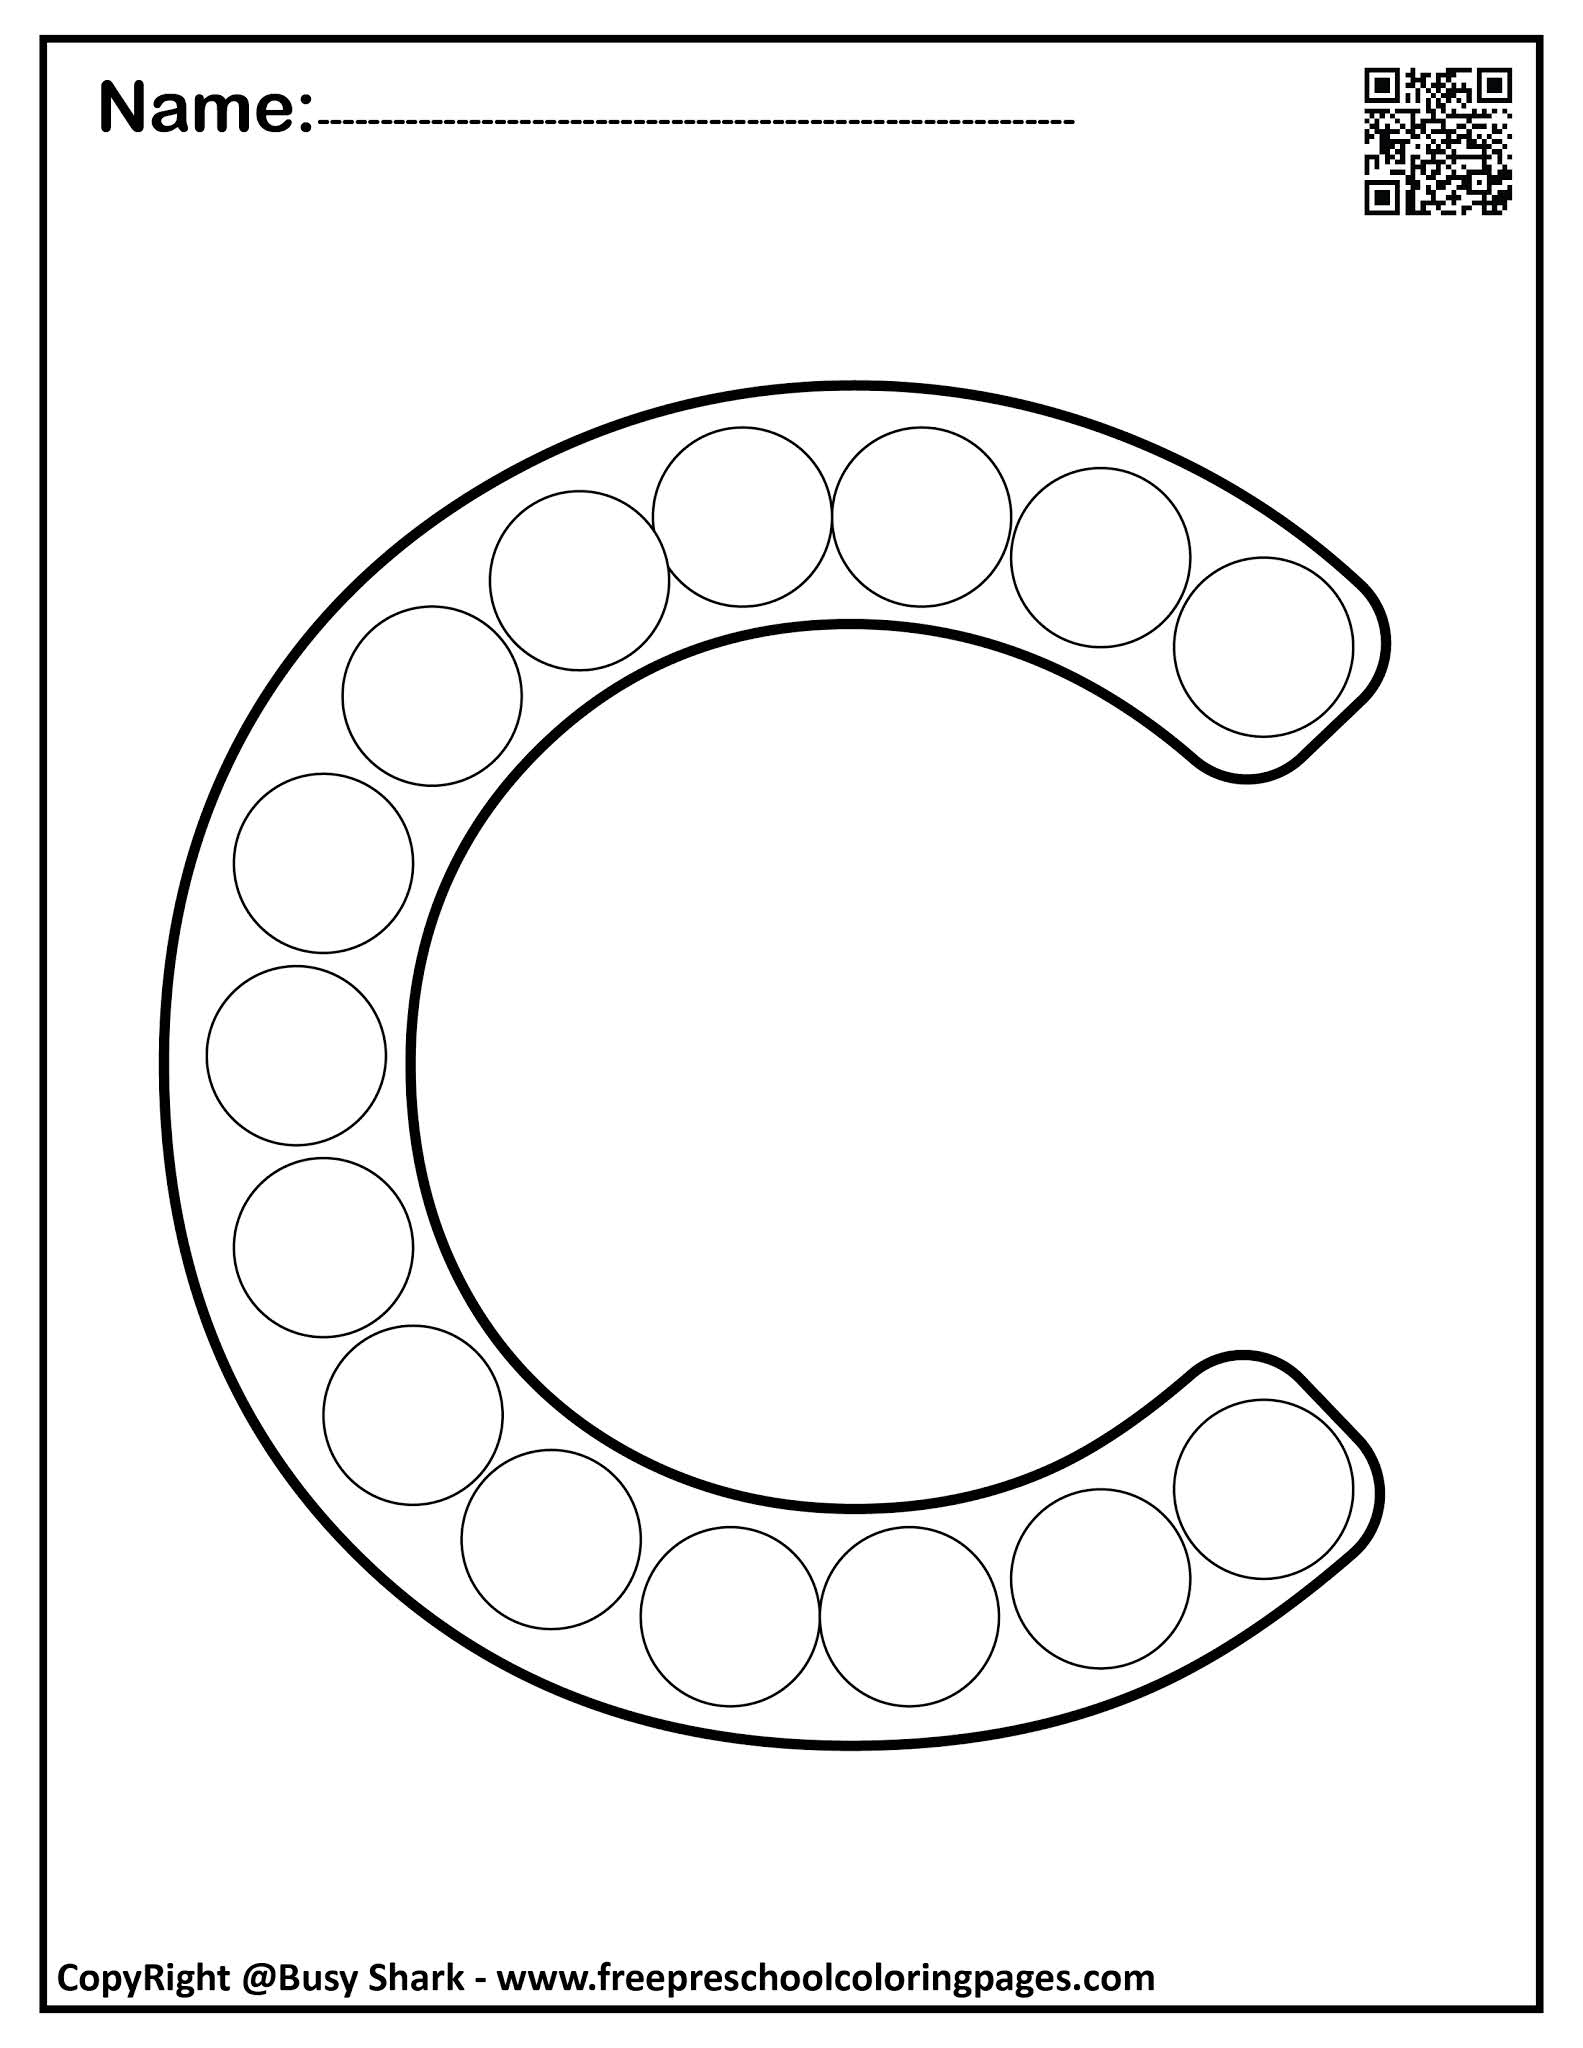 Set of Letter C "10 free Dot Markers coloring pages"